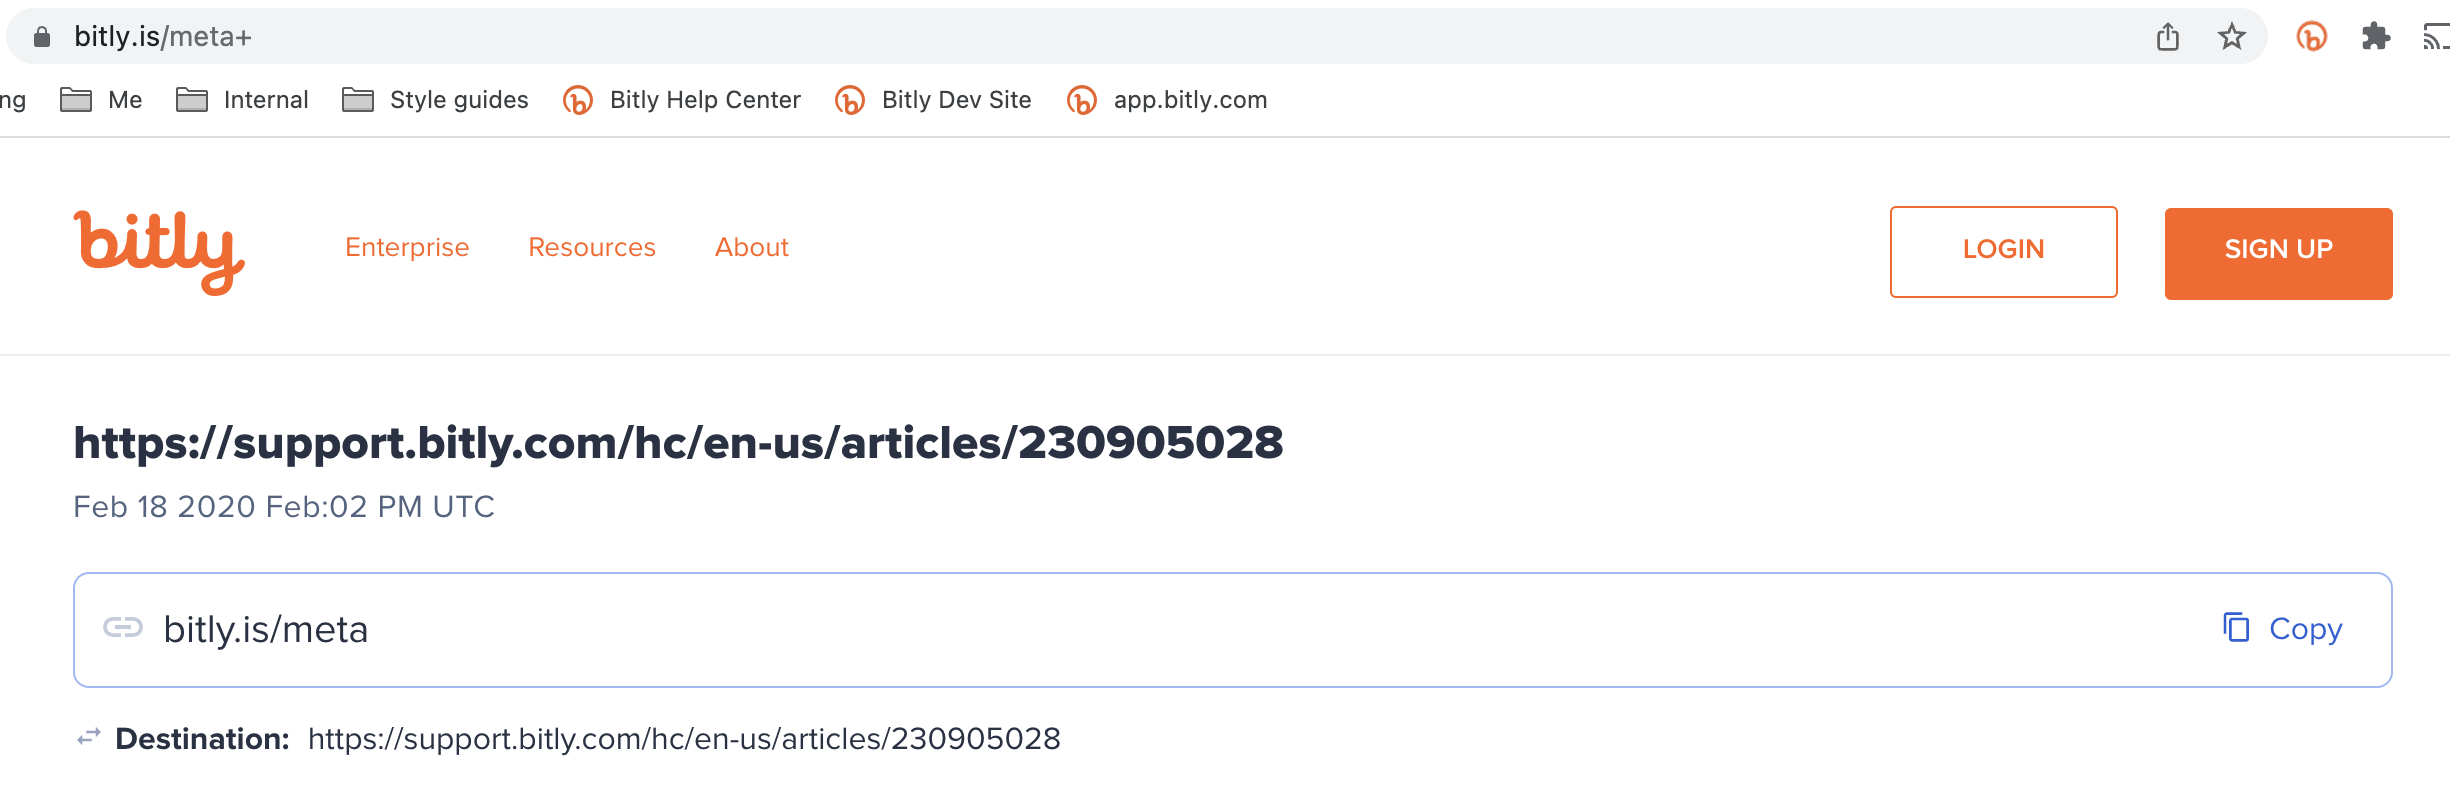 Bitly_is_meta__not_signed_in_.png